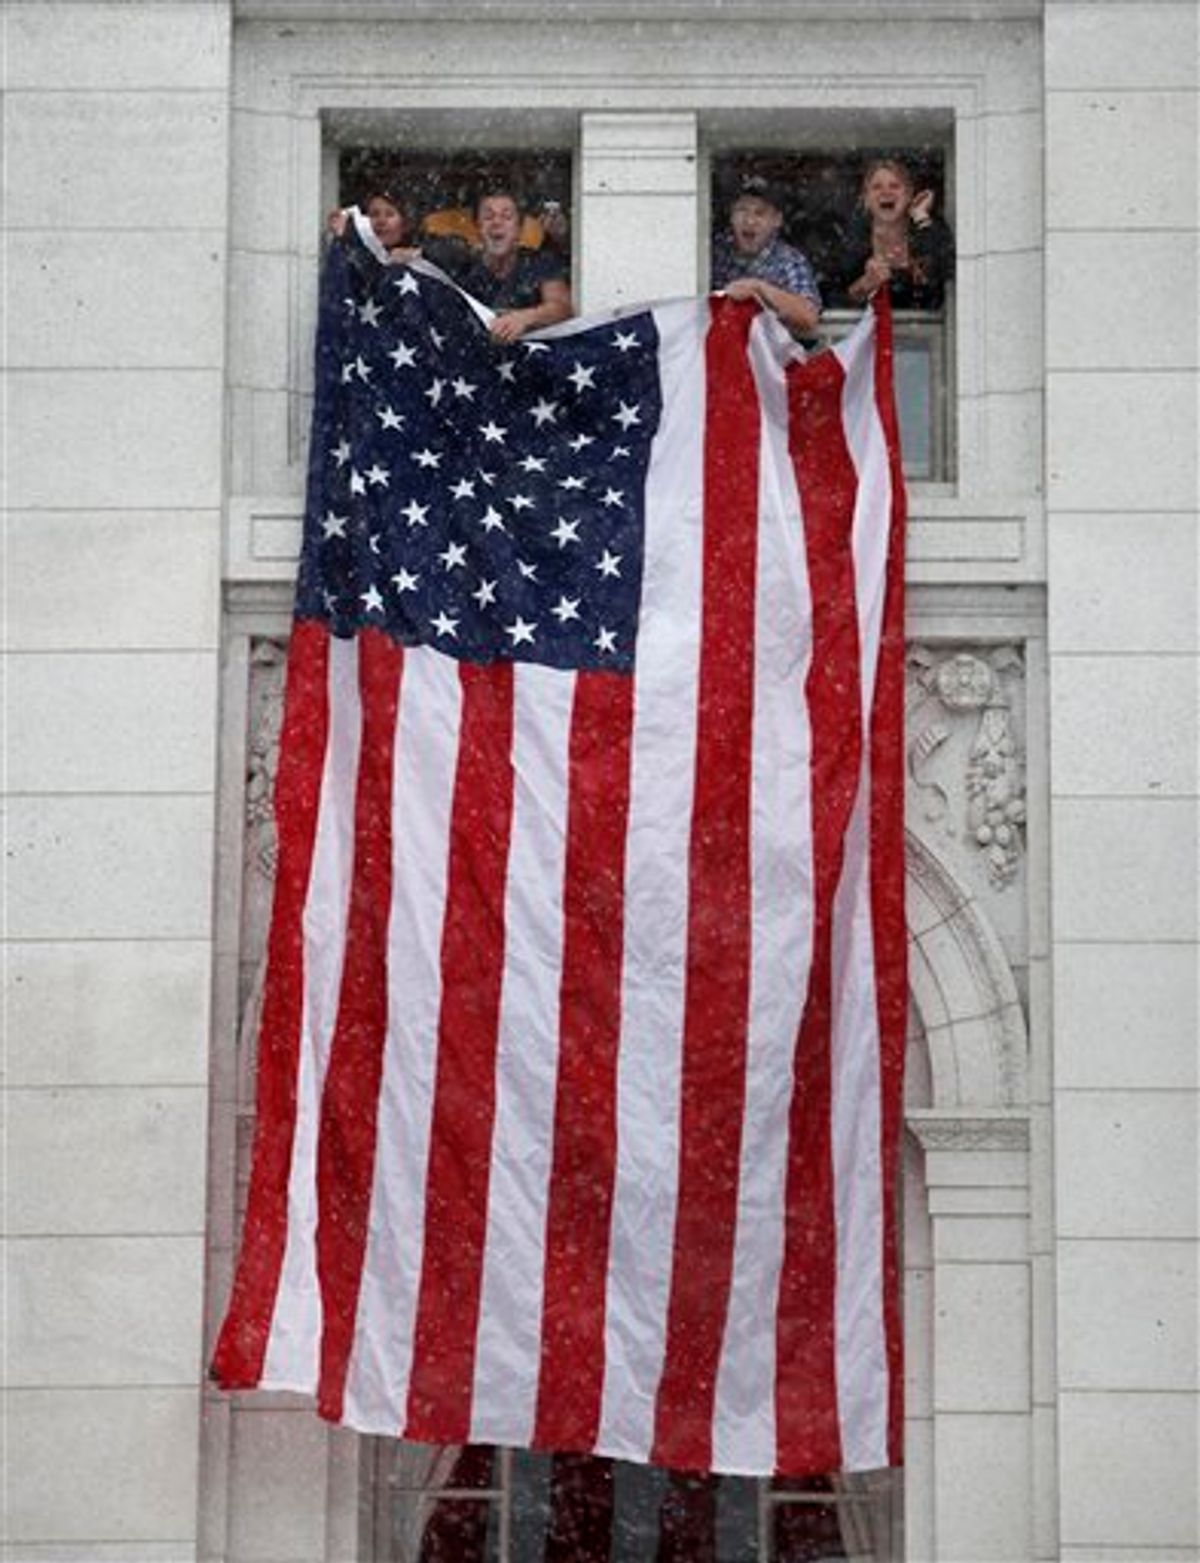 Rally supporters hang an American flag from fourth floor windows of the Wisconsin State Capitol Building as thousands of opponents of Governor Scott Walker's budget repair bill gather for ongoing protests inside and outside the State Capitol Building in Madison, Wisconsin Saturday, February 26, 2011. (AP Photos/Wisconsin State Journal, John Hart) (AP)